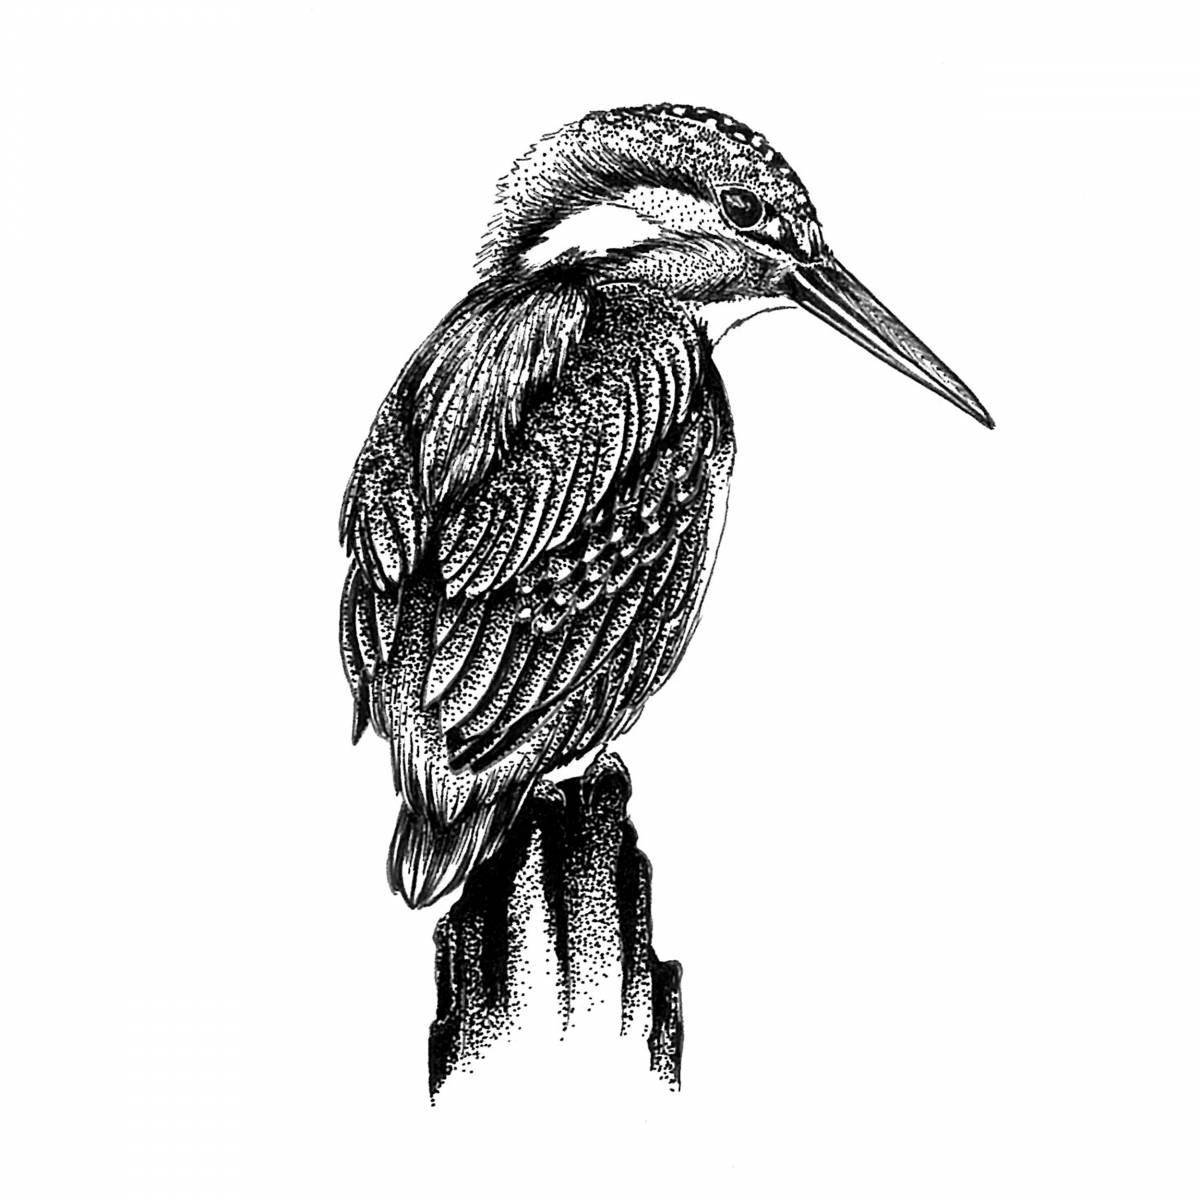 Coloring book cheerful kingfisher